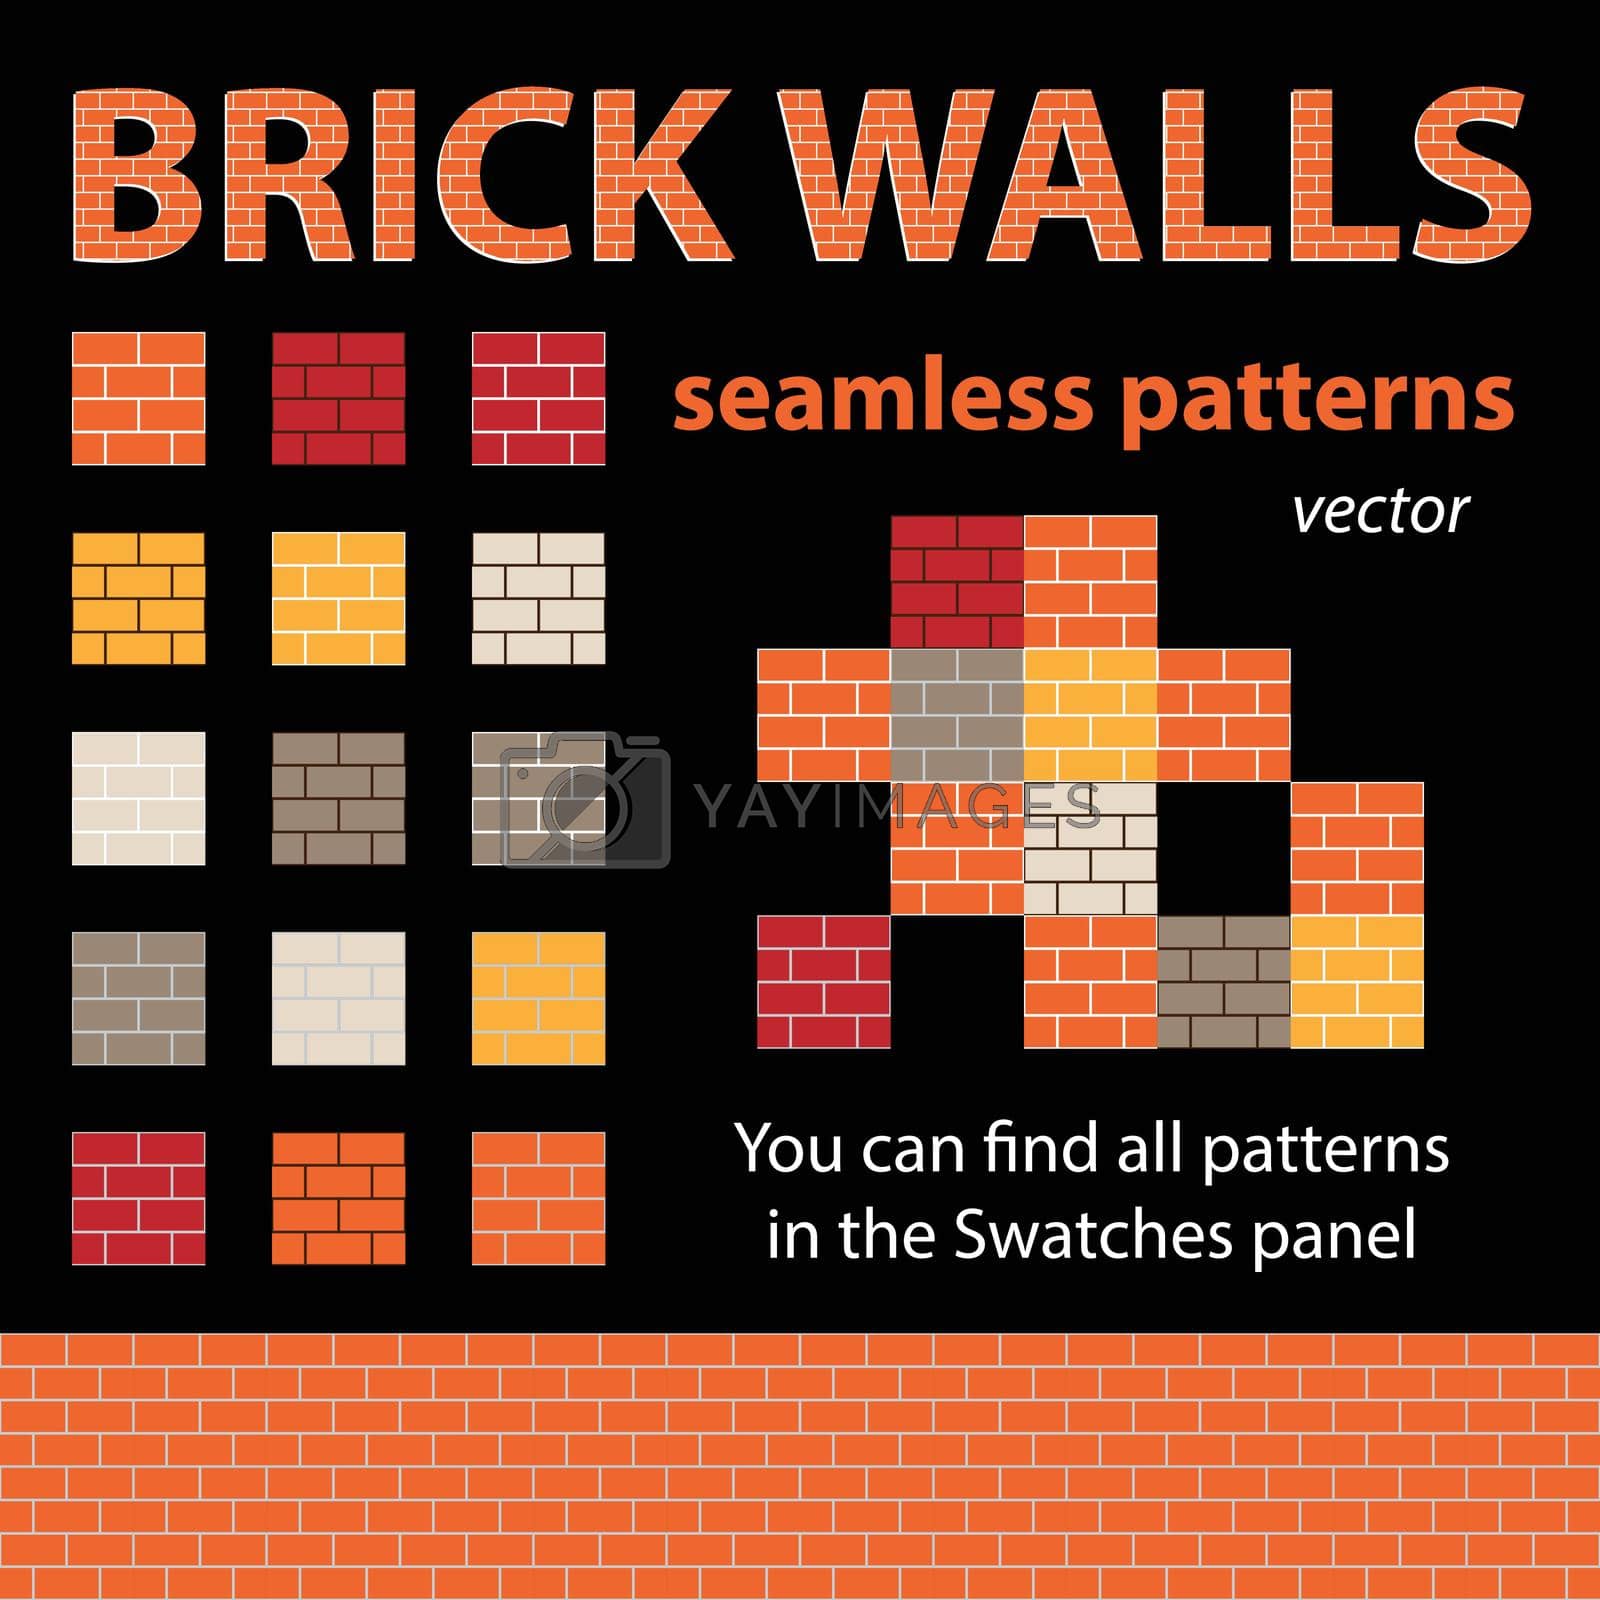 Brick walls seamless textures. Vector patterns for backgrounds or game design